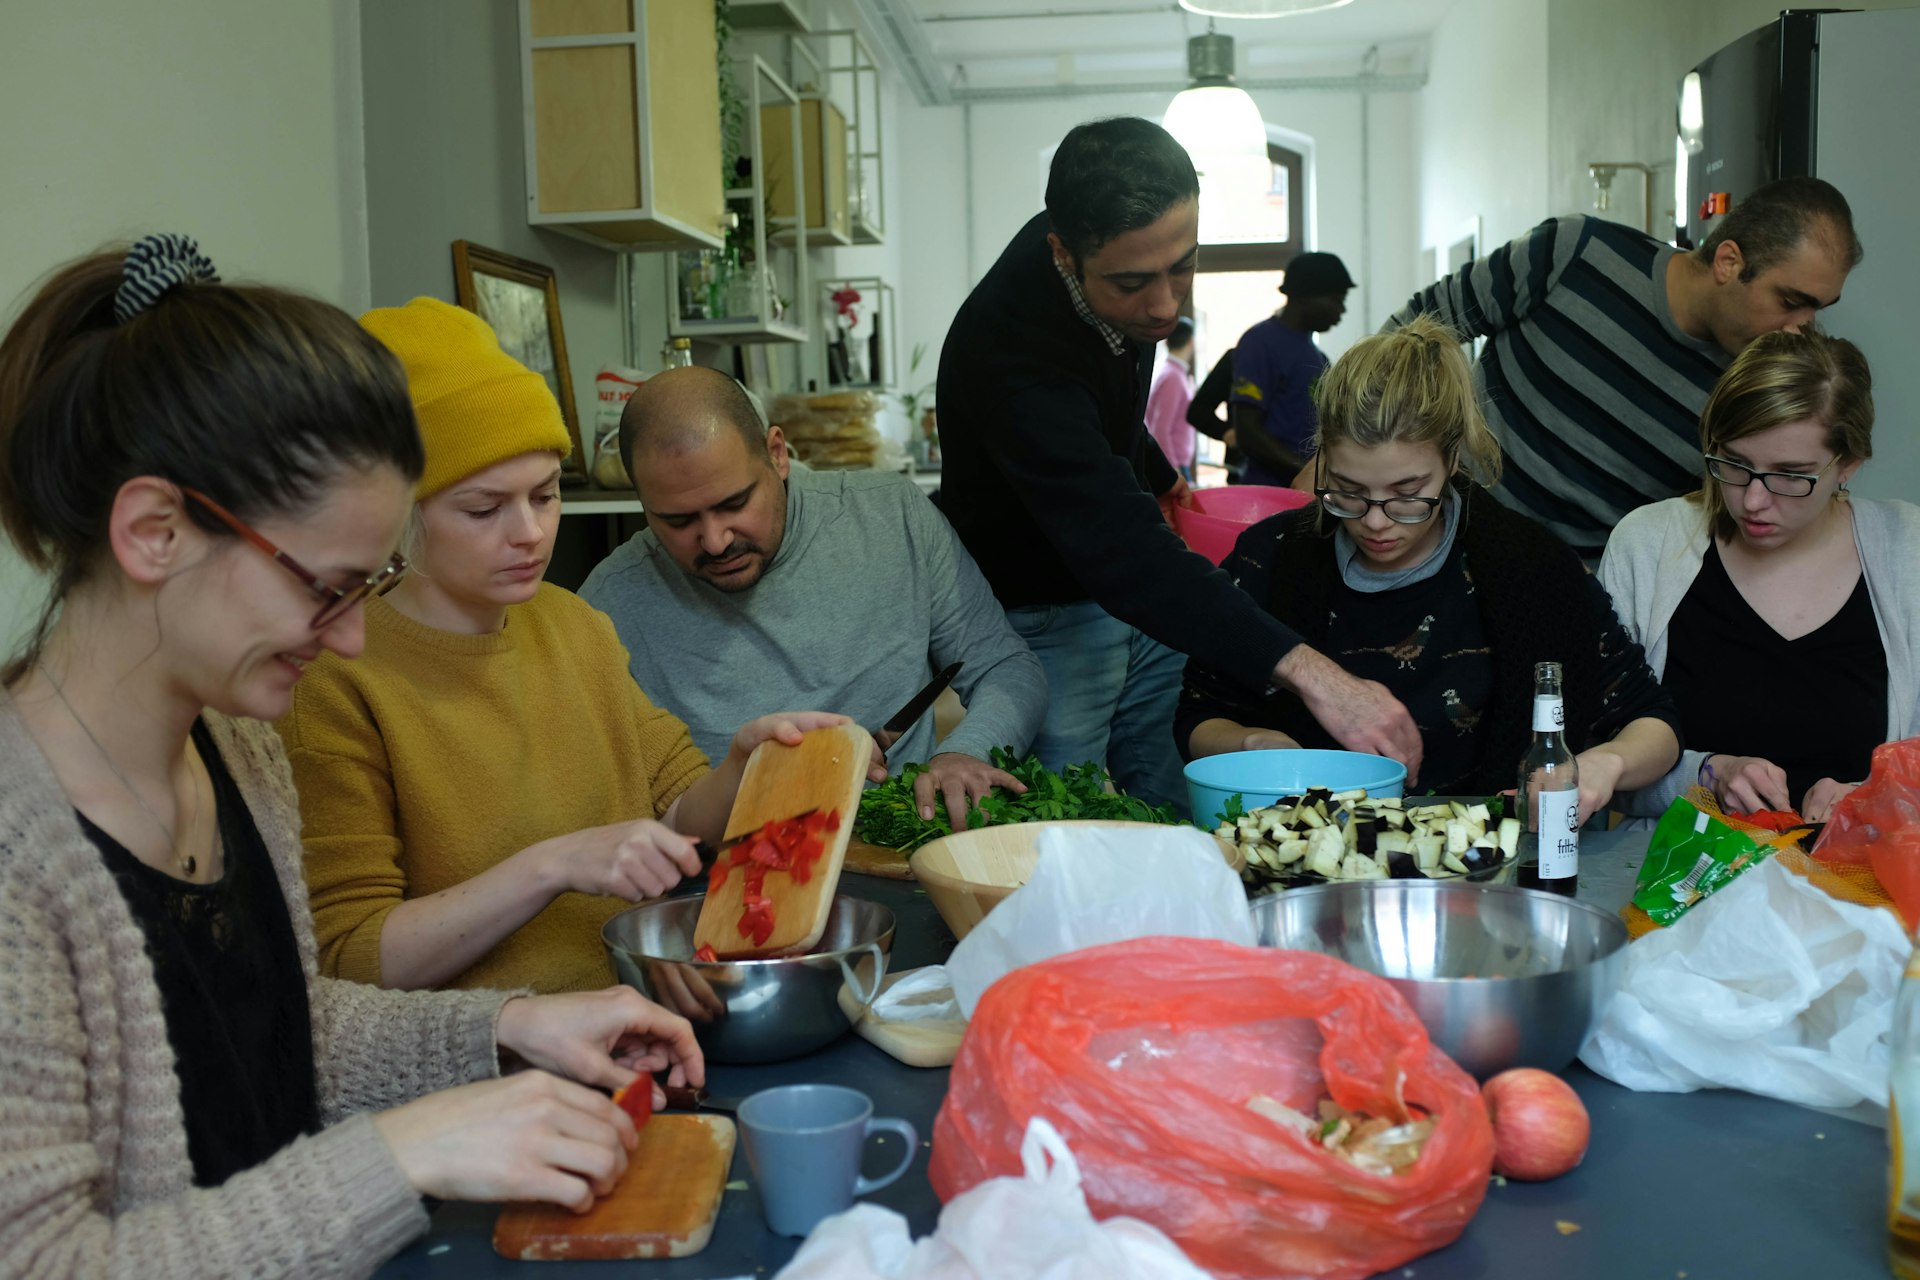 Refugees and young Berliners are finding community through food